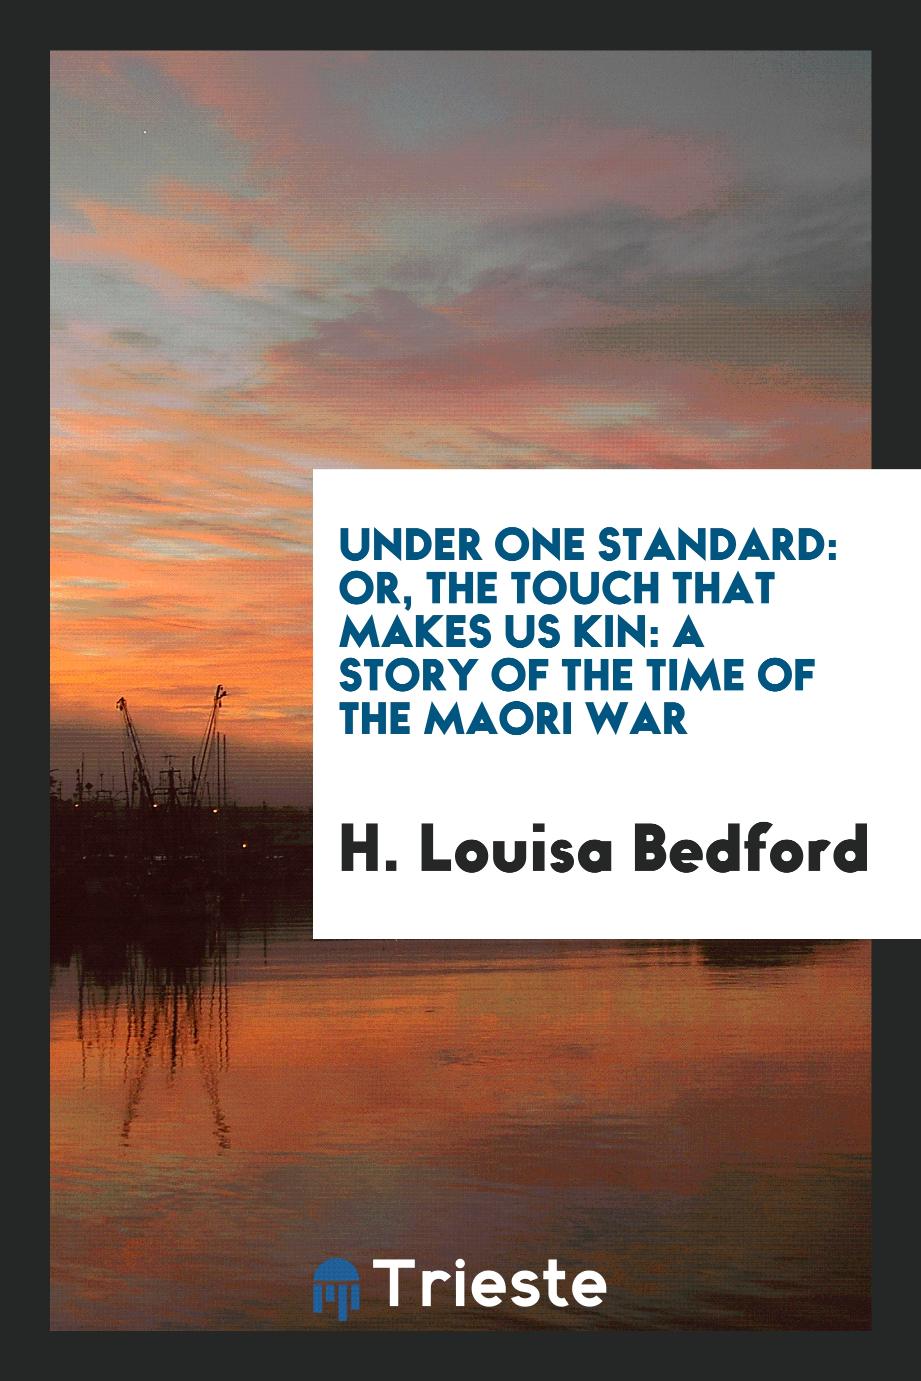 Under one standard: or, The touch that makes us kin: a story of the time of the Maori War